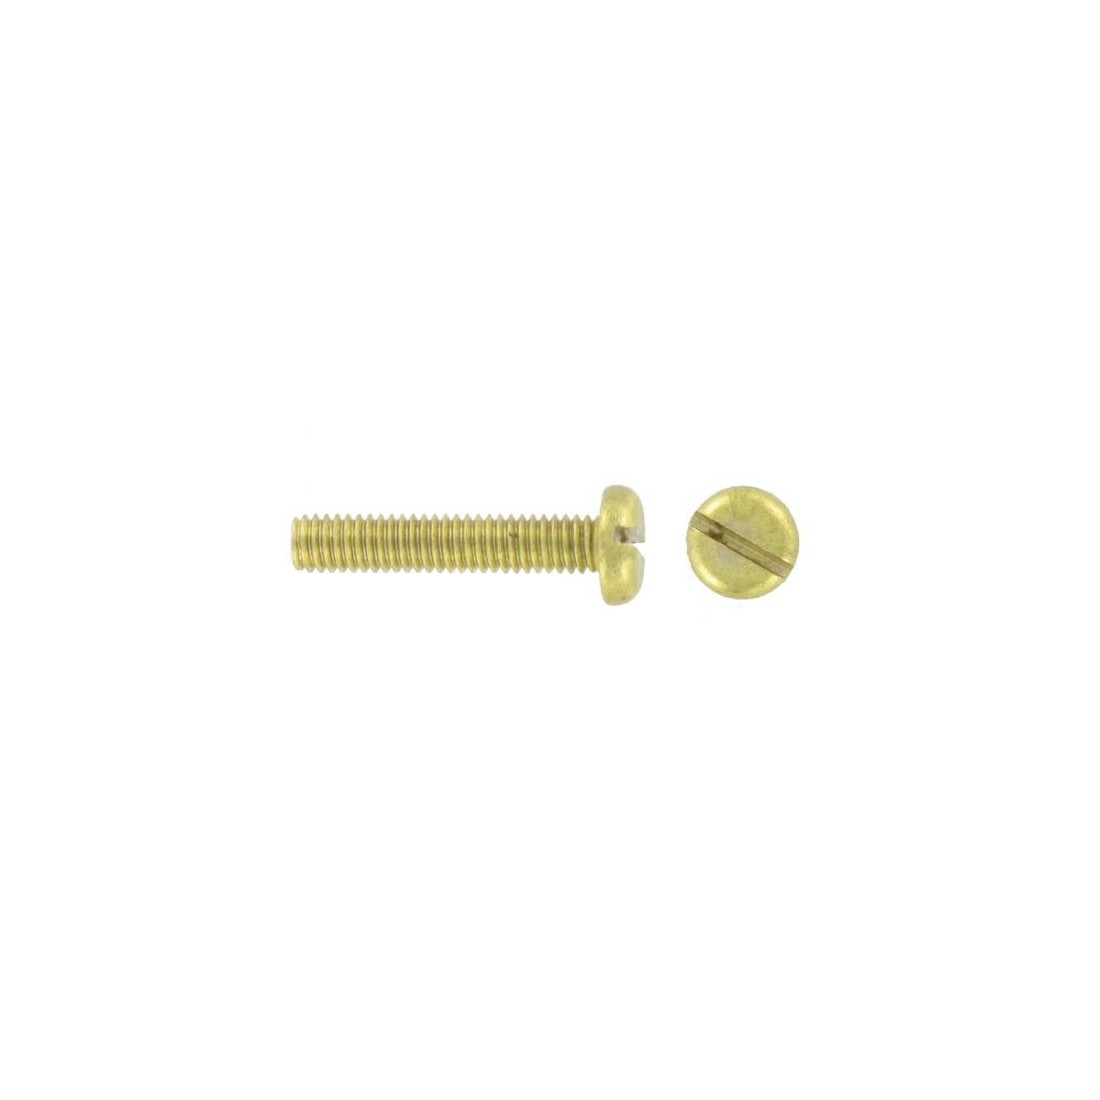 4mm SOLID BRASS PAN HEAD SLOTTED MACHINE SCREWS METRIC VARIOUS SIZES AVAILABLE